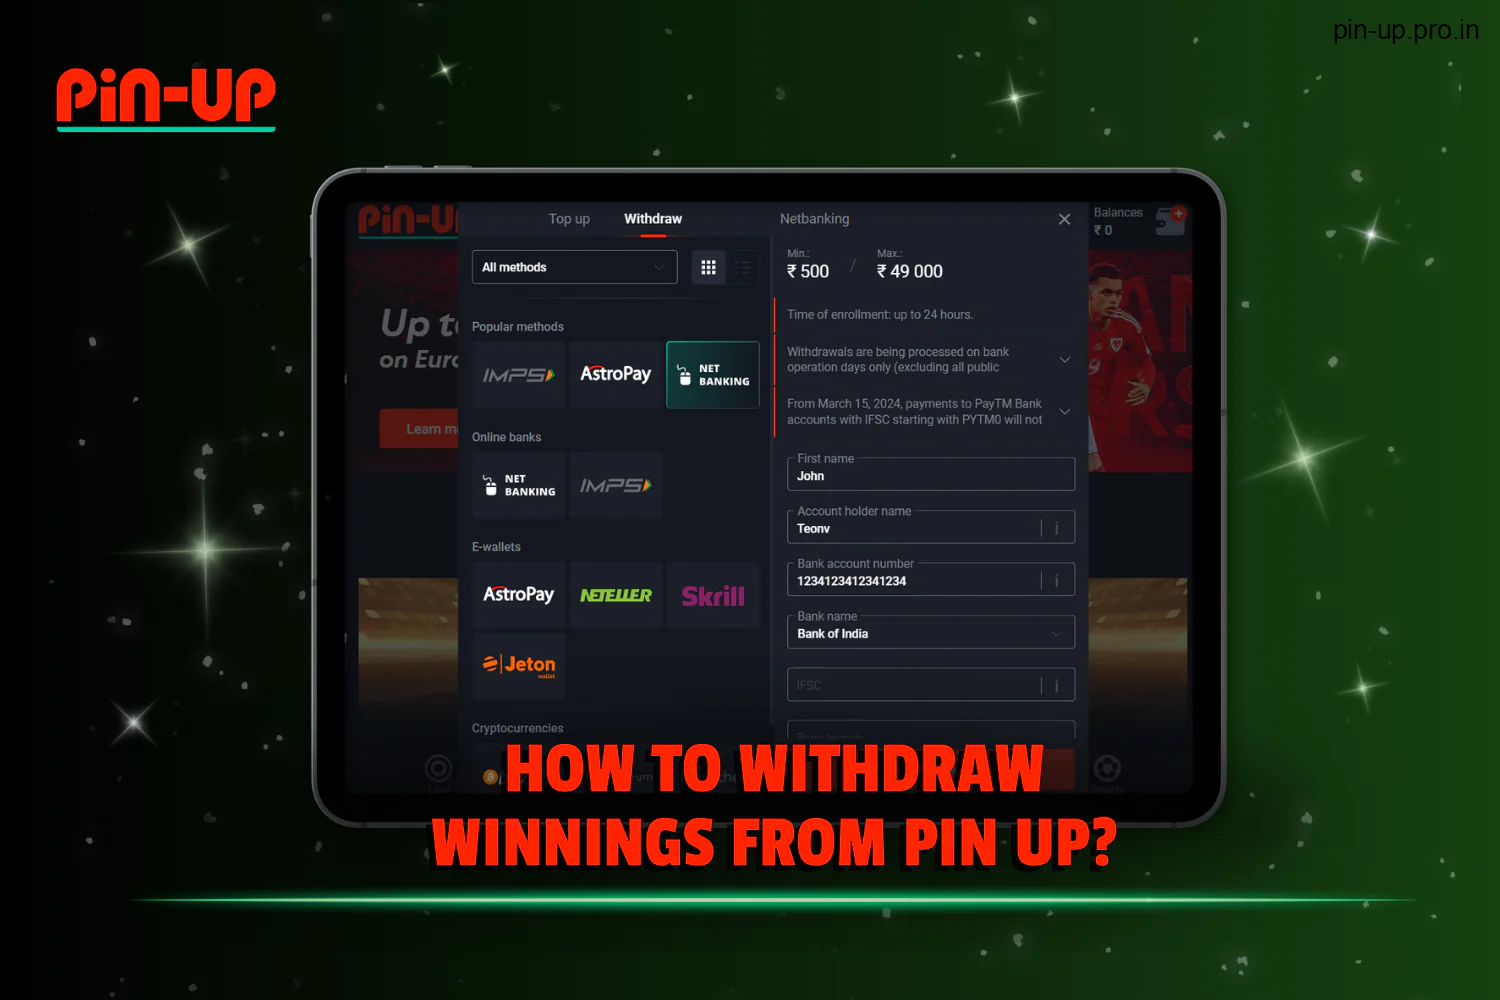 Indian users of Pin Up have numerous options available for withdrawing their winnings